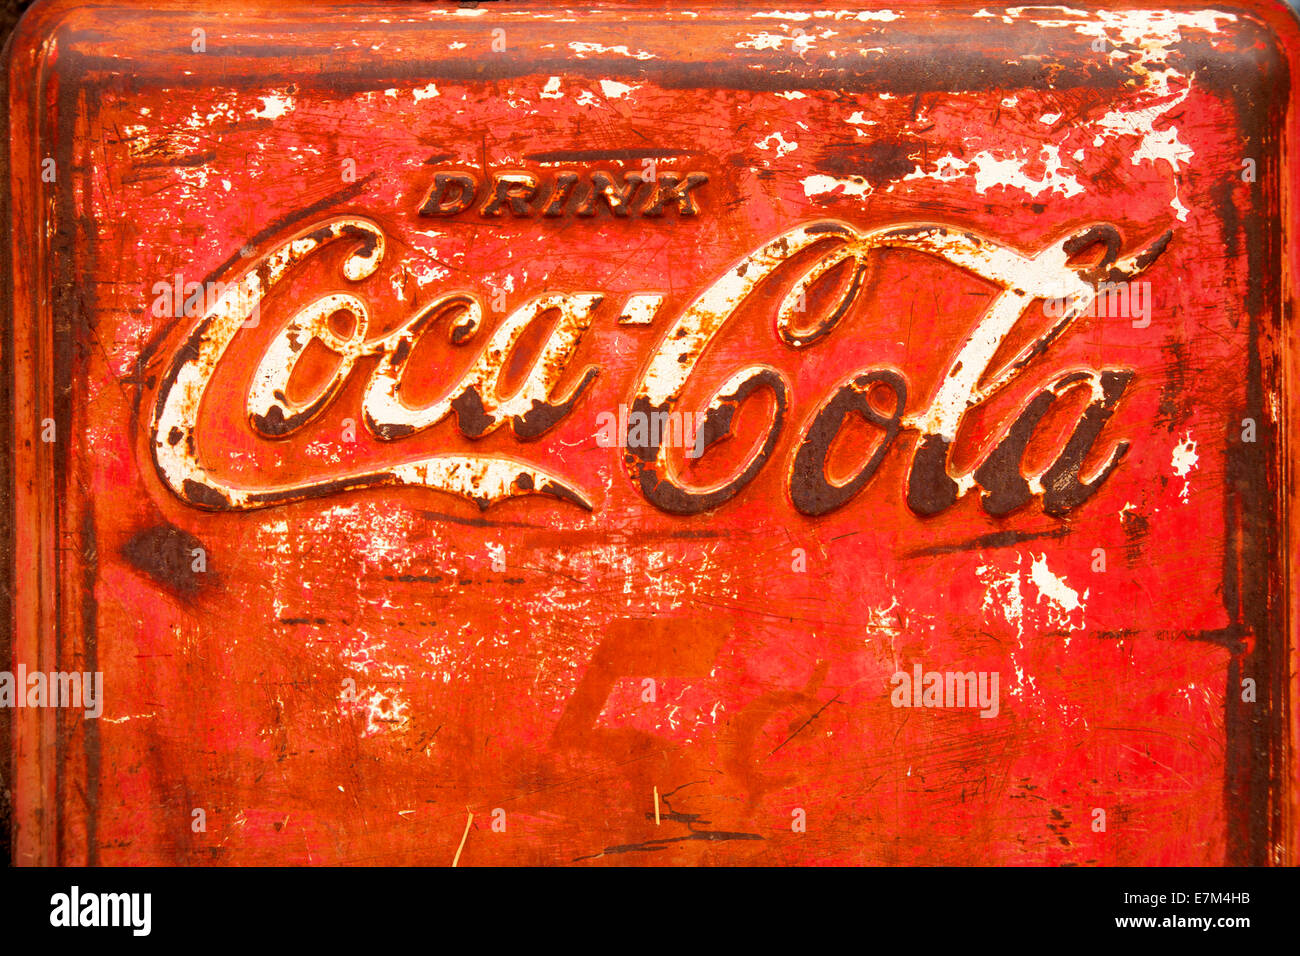 The trademark logo of Coca-Cola appears in Spencerian script on a rusted ice cooler. Stock Photo